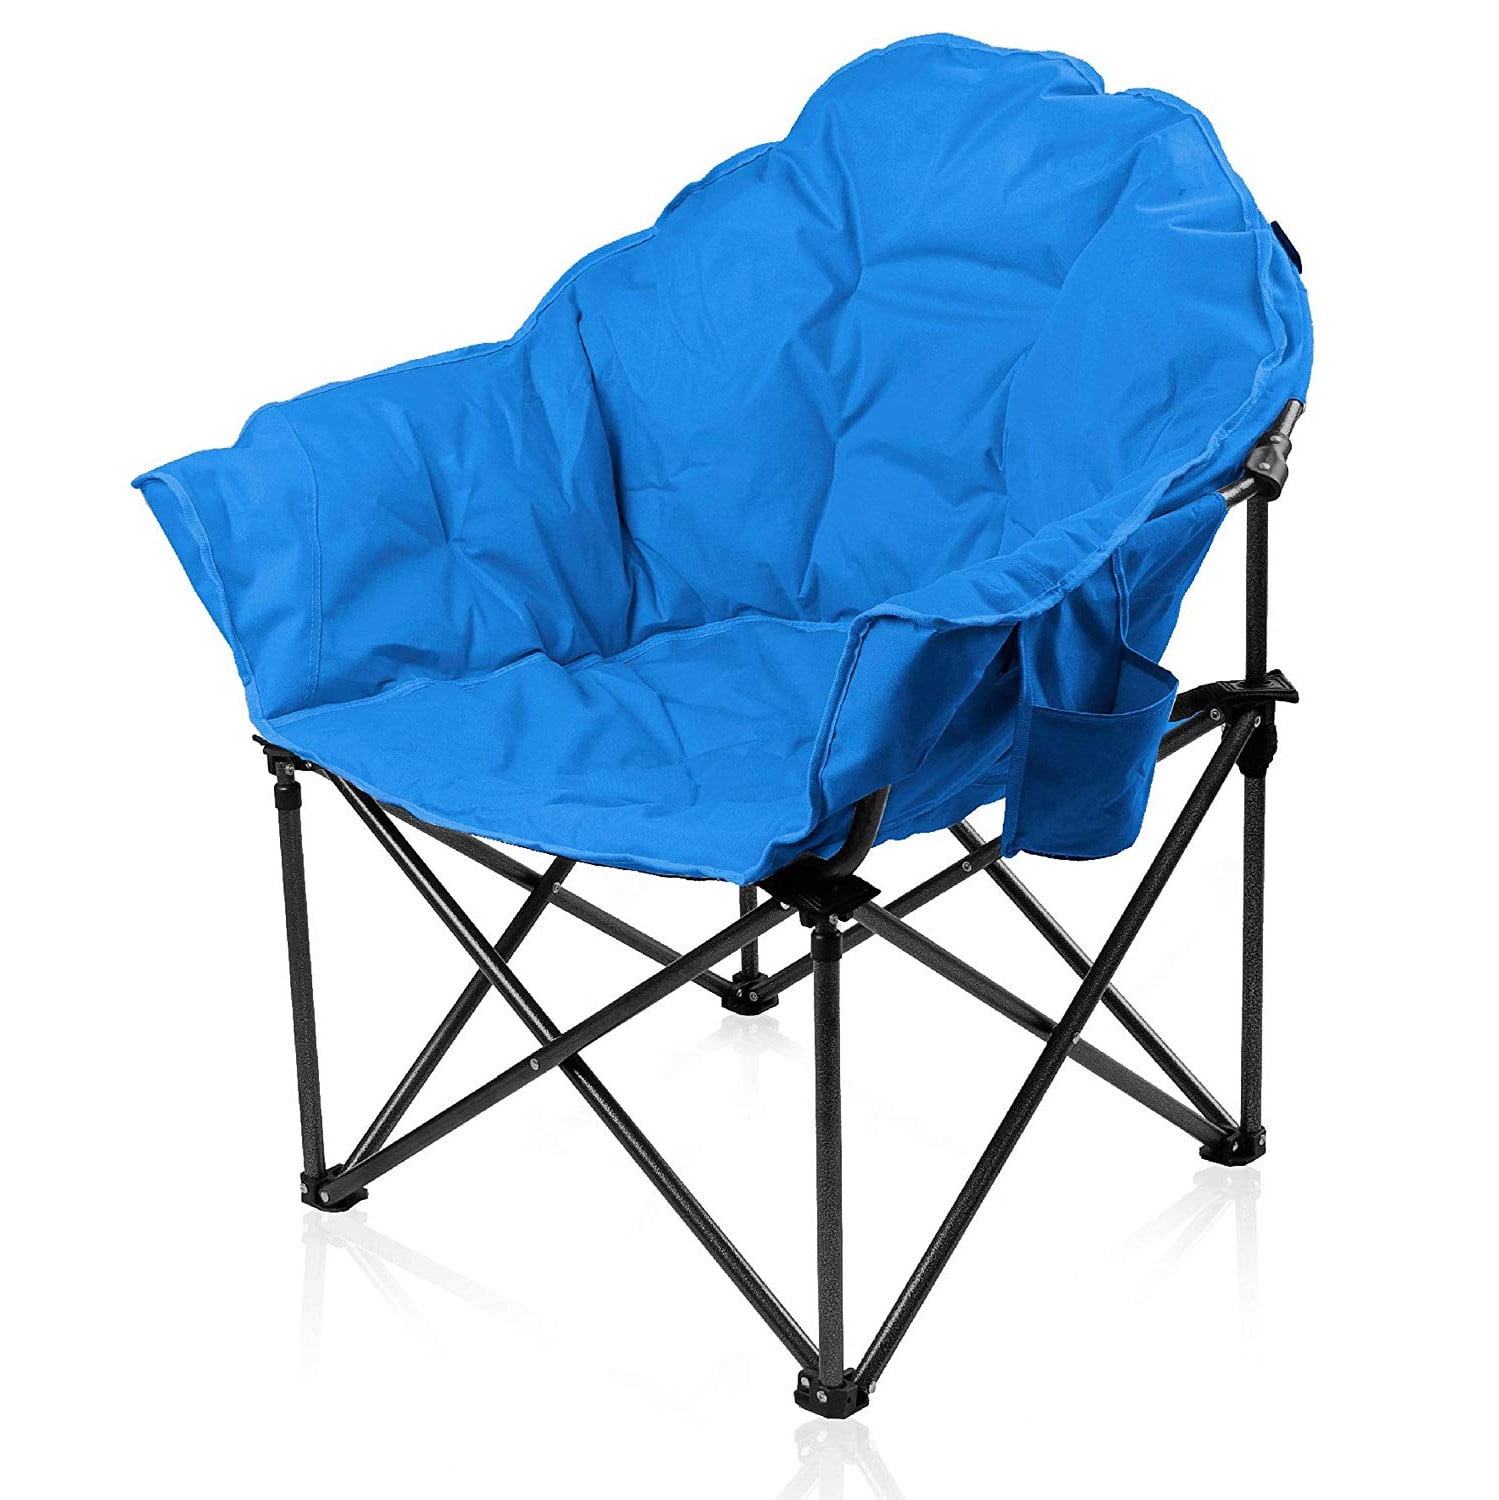 Comfy Portable Folding Saucer Chair with Cup Holder and Carry Bag KingCamp Oversized Moon Chairs Padded Seat Heavy-Duty for Adults Blue